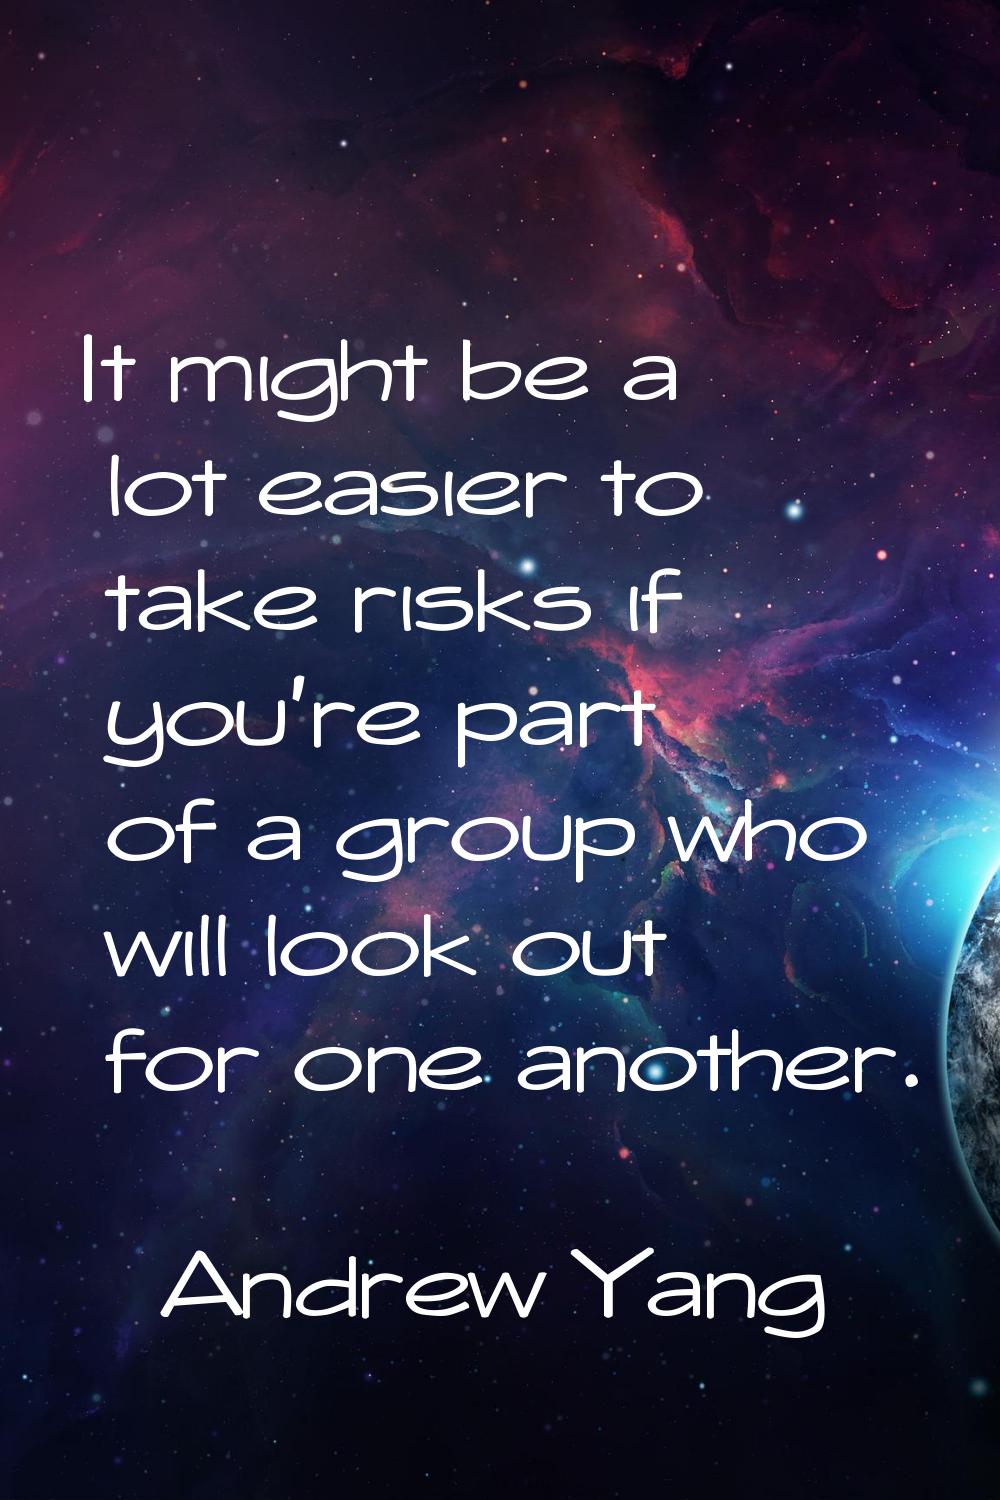 It might be a lot easier to take risks if you're part of a group who will look out for one another.